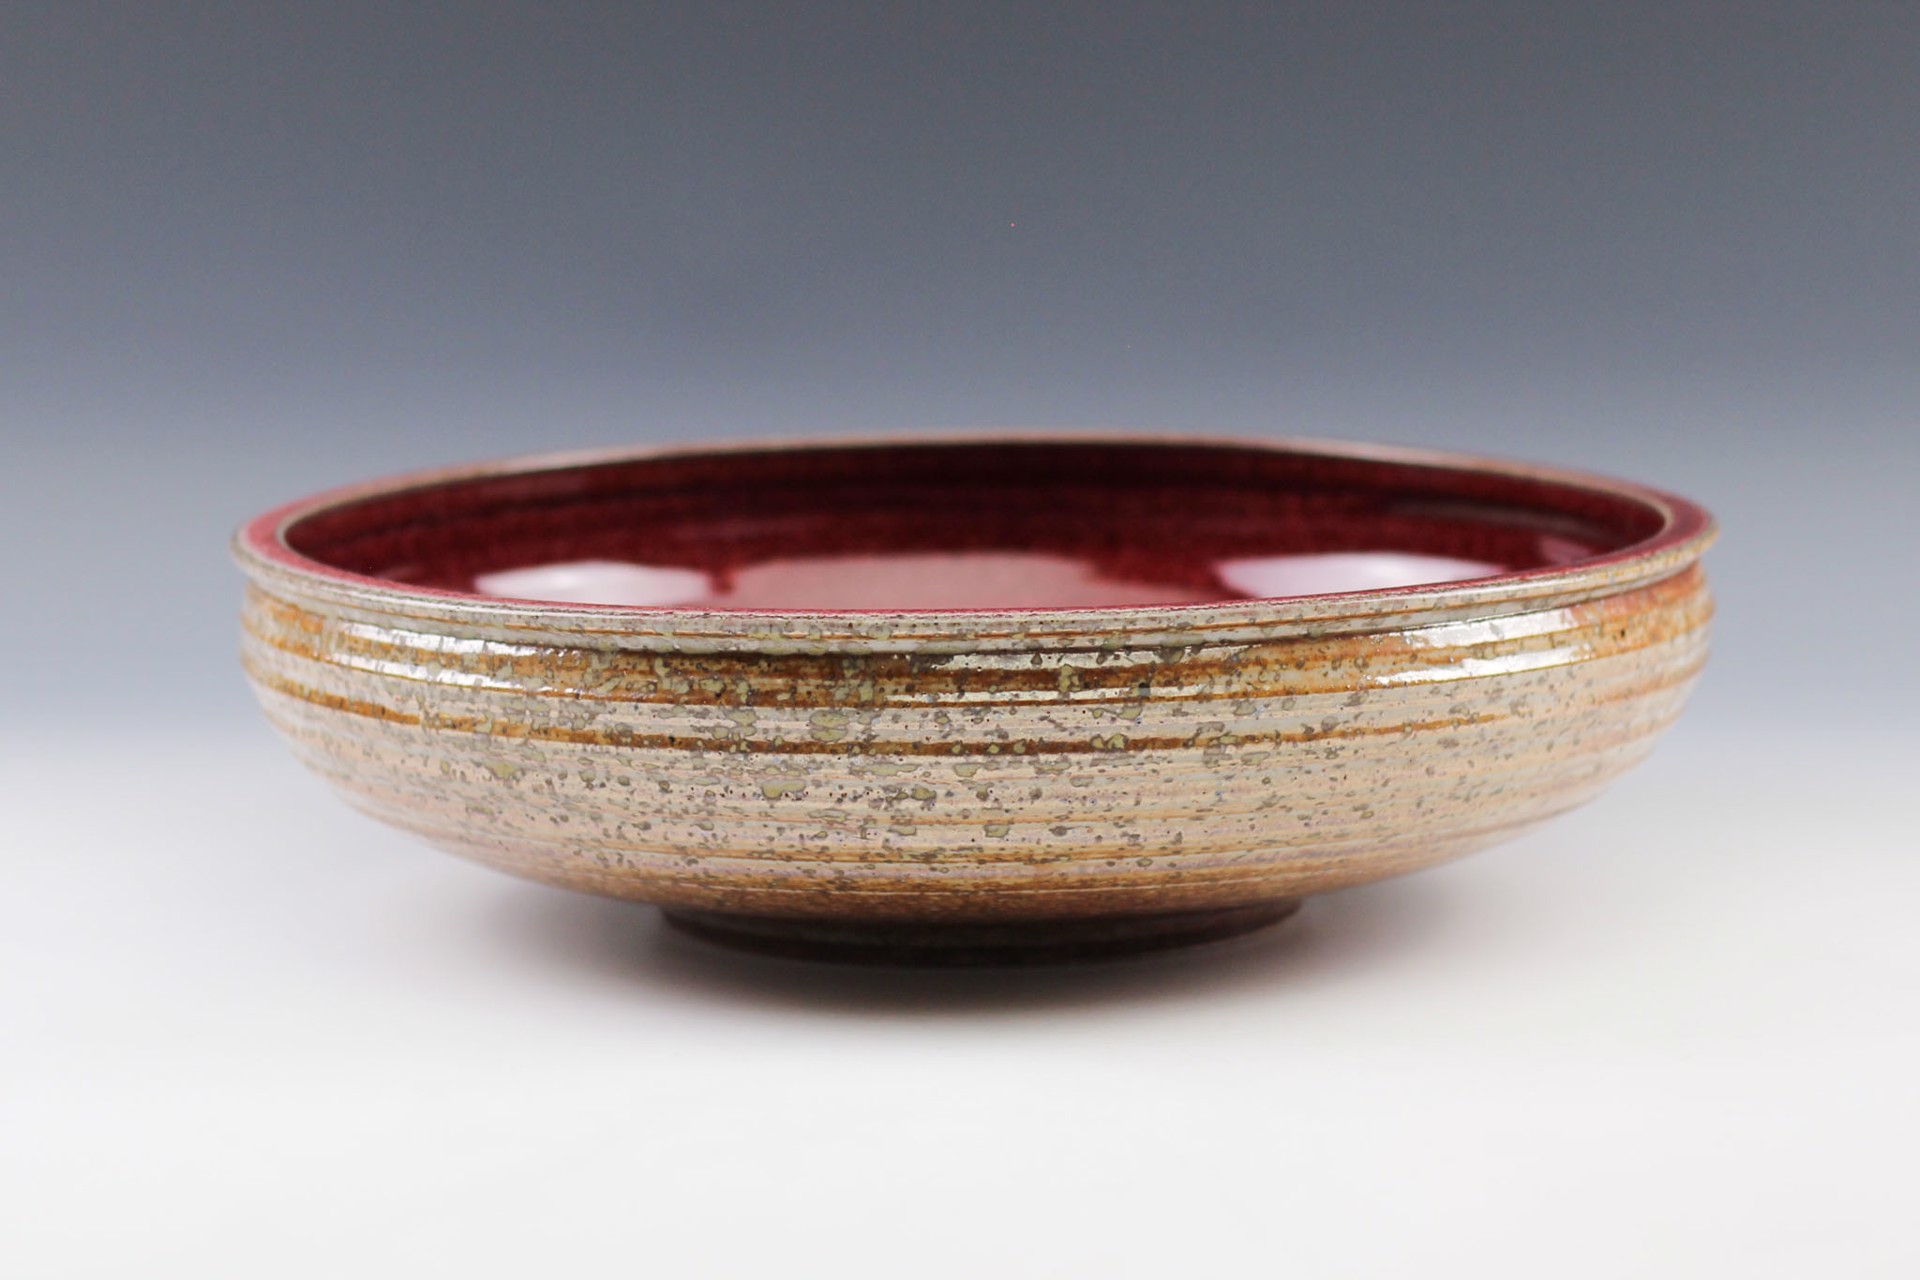 Red Fruit Bowl by Winthrop Byers